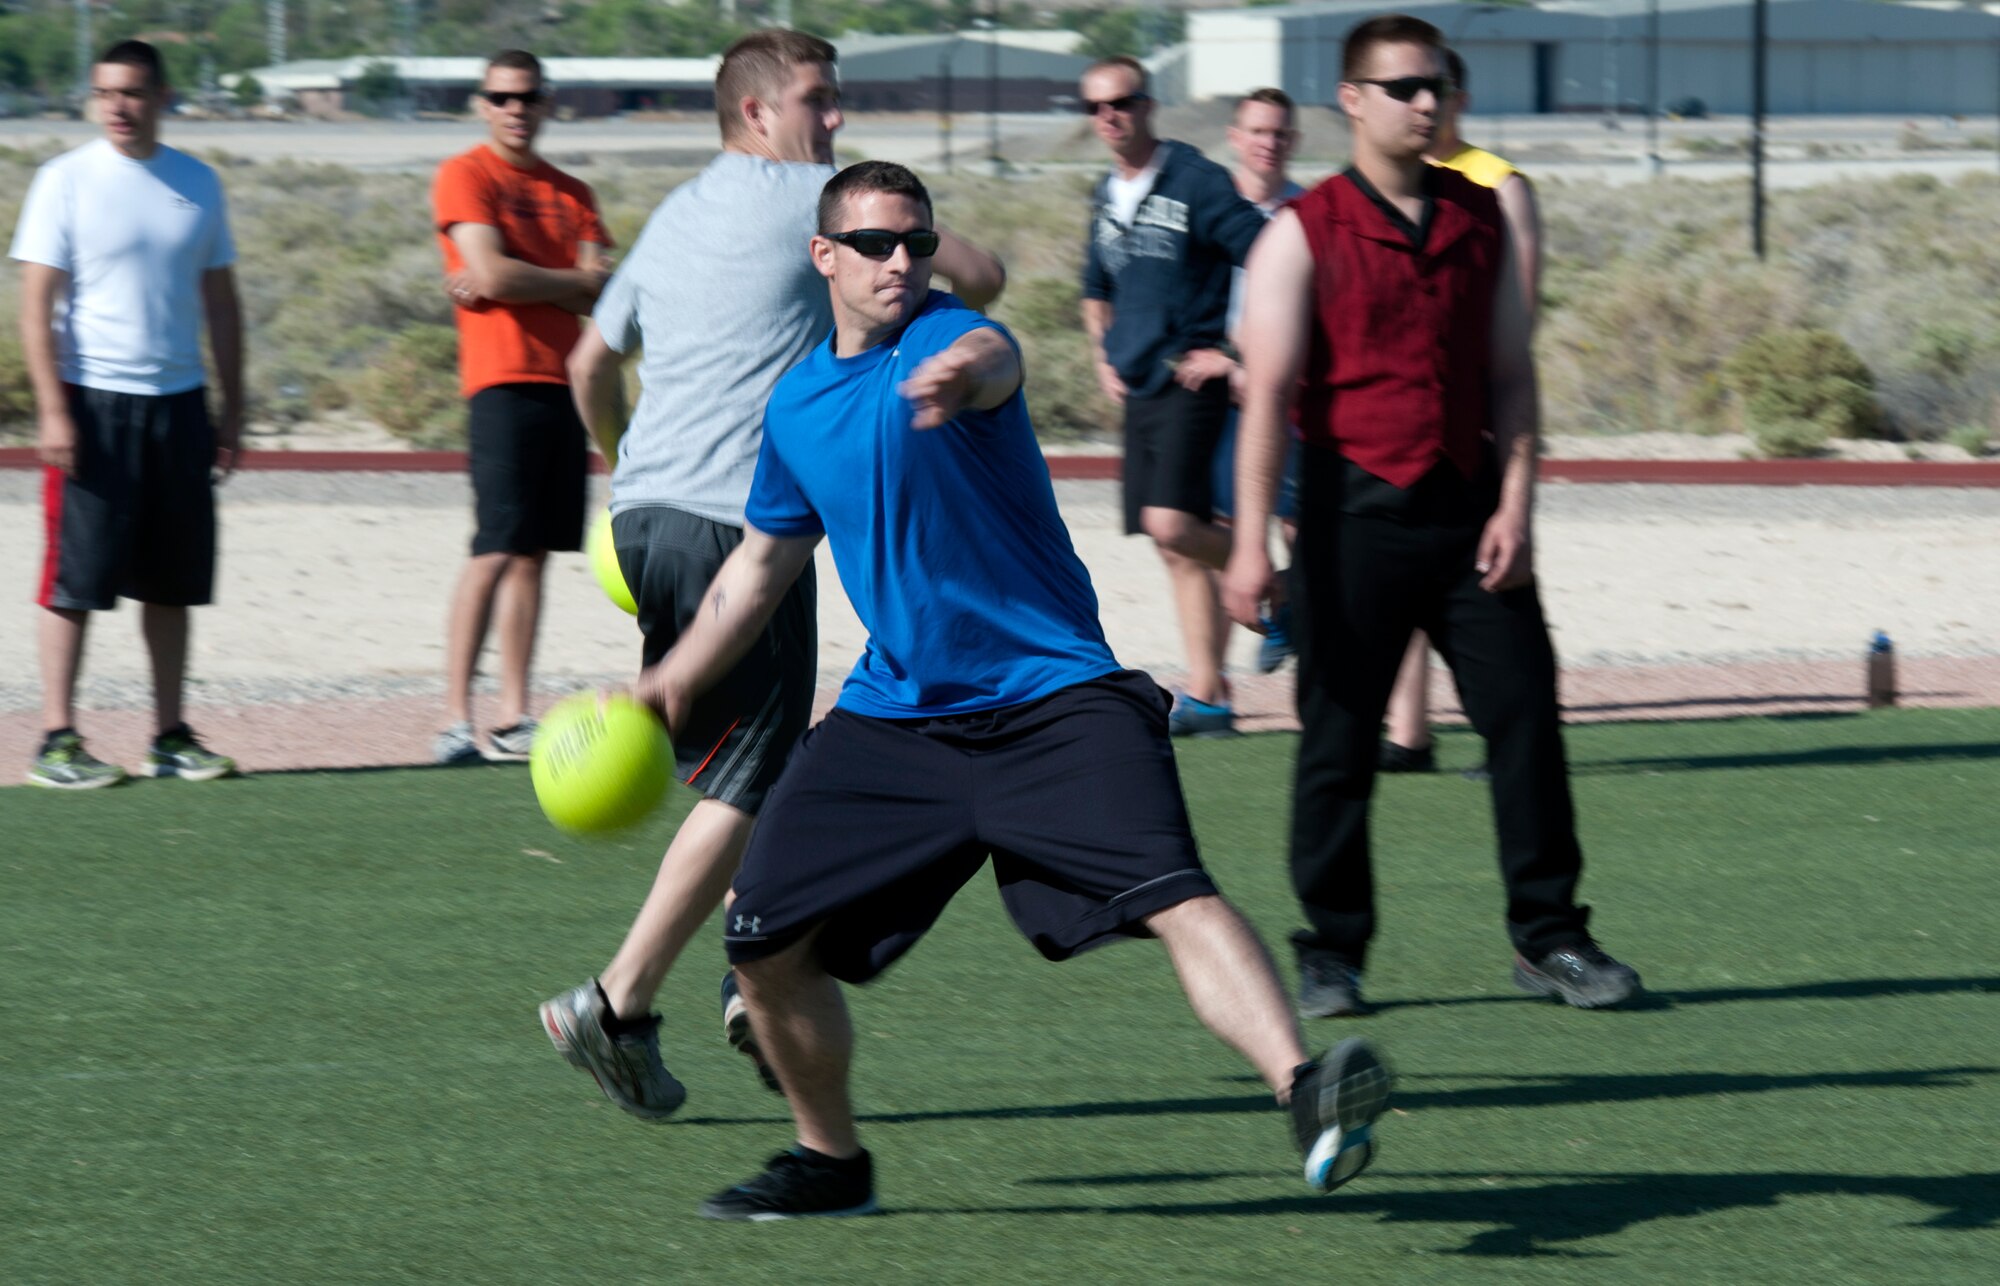 Staff Sgt. Andrew, 432nd Maintenance Squadron ammunition accountability manager, zeroes in on a target during a dodge ball event May 12, 2014, as part of Police Week at Creech Air Force Base, Nev. National Police Week started in 1962 to pay special recognition to those law enforcement officers who have lost their lives in the line of duty (Last names have been withheld for security reasons). (U.S. Air Force photo by Tech. Sgt. S.E./Released)